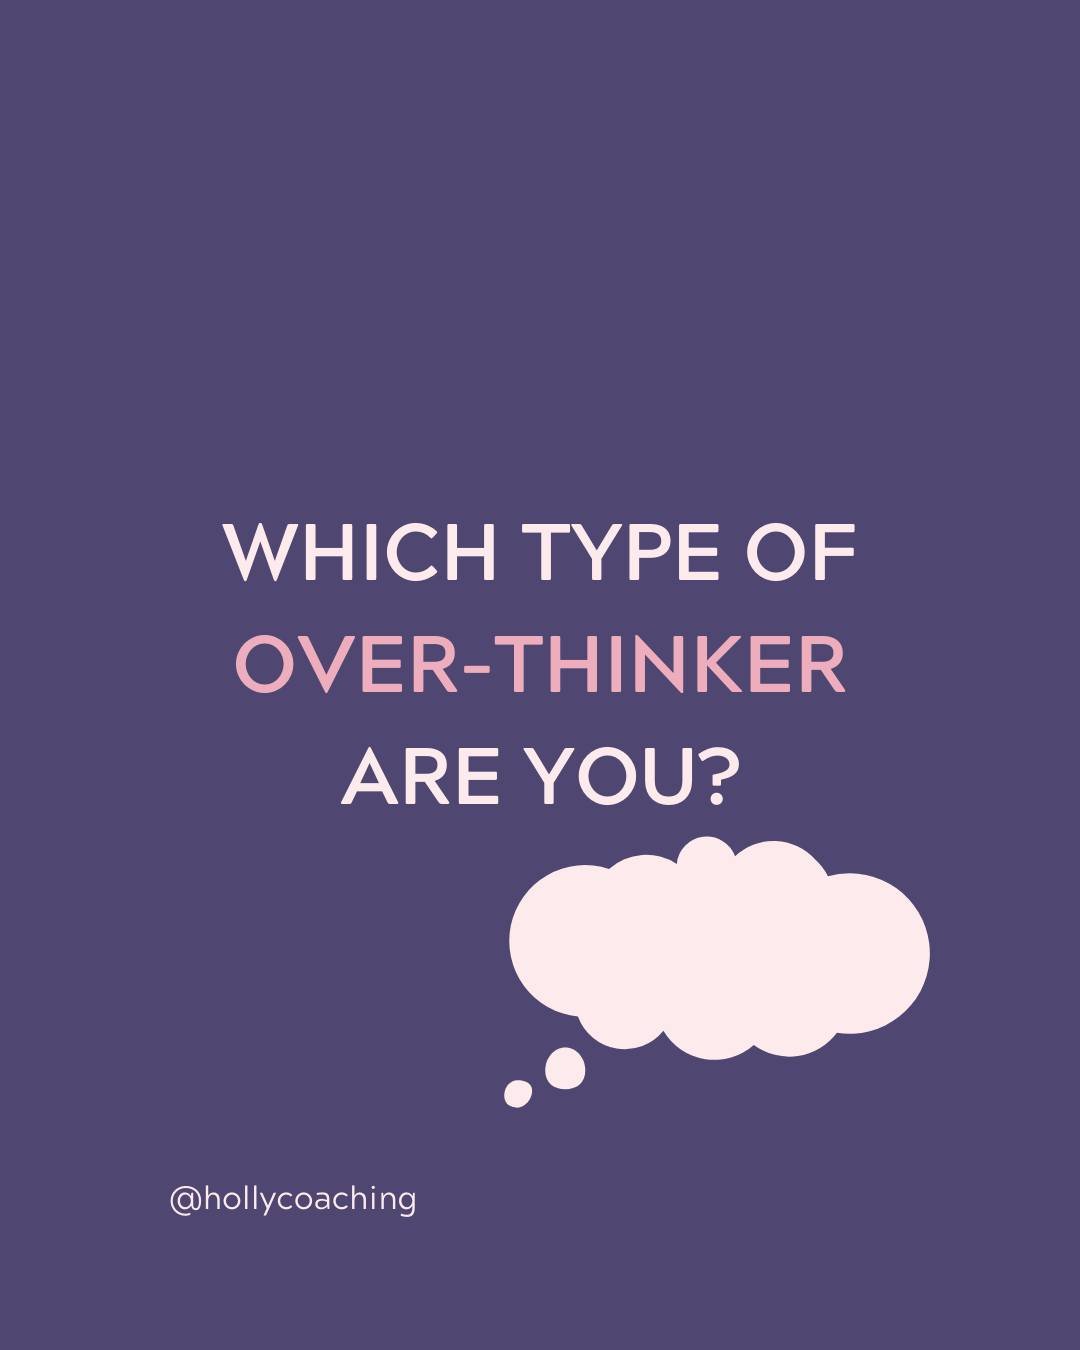 🌟 Are you an over-thinker? 🤔 Don't worry, you're not alone! Overthinking can take many forms and affect different aspects of our lives. Here are four types of over-thinkers that you might relate to:

✨rumination over the past
✨worry about the futur